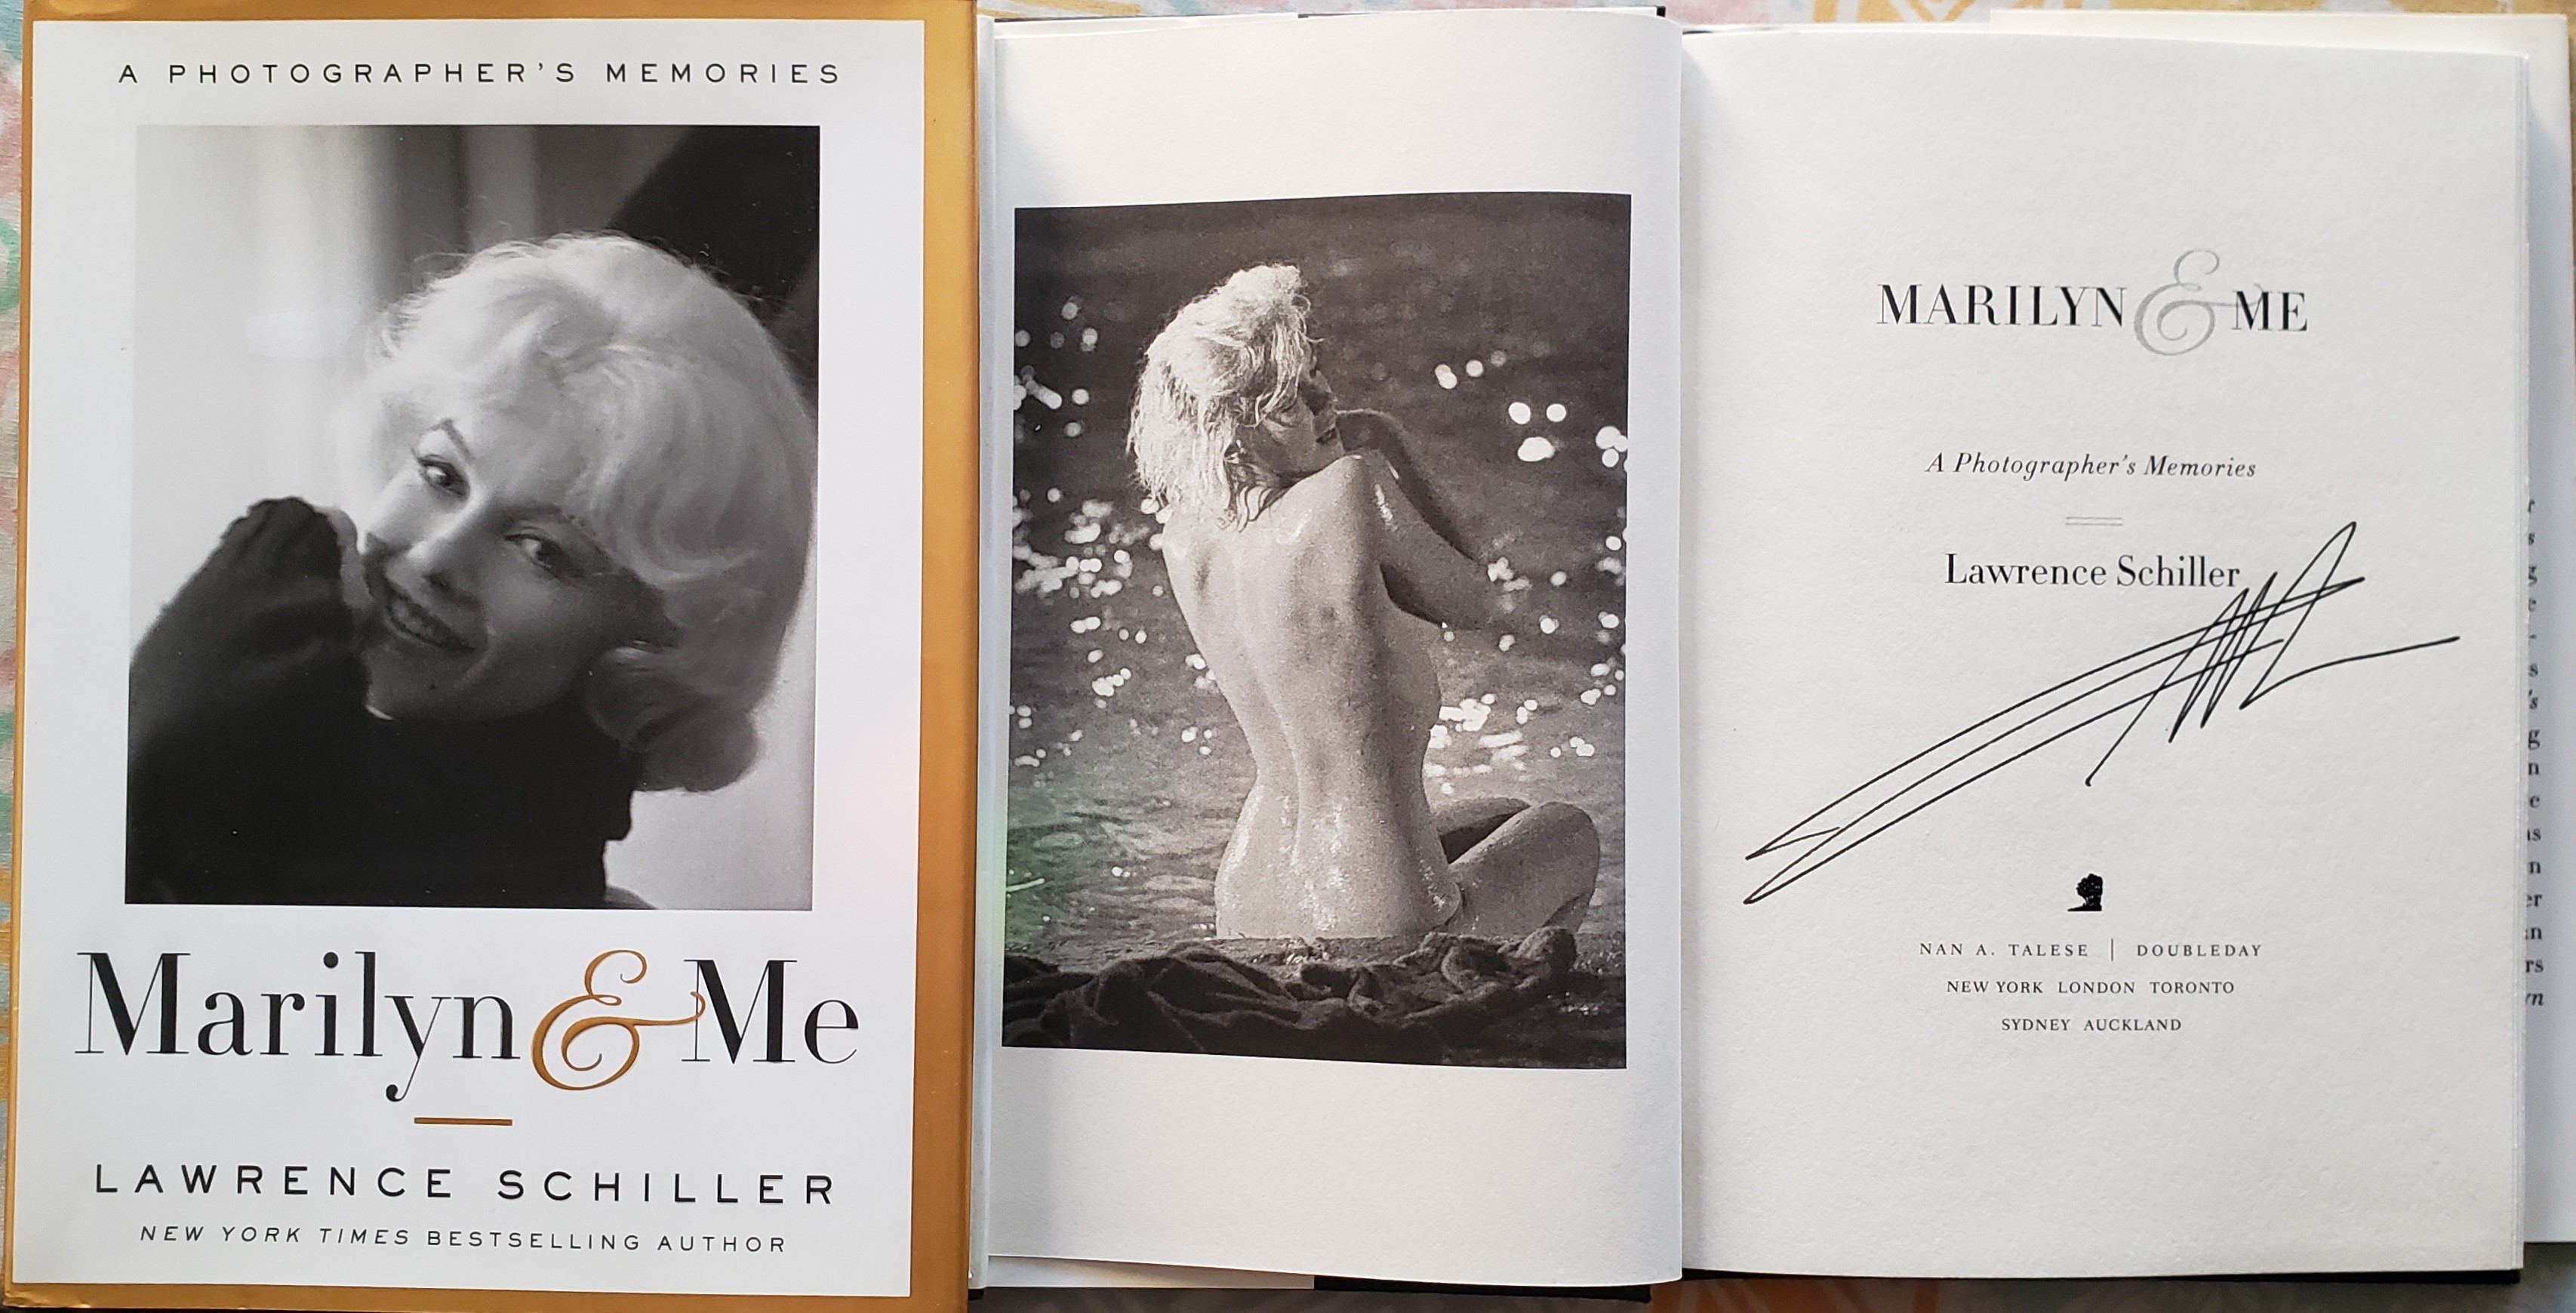 Memories　1st　Author(s)　Lawrence:　Marilyn　a　Fine　Very　Signed　(2012)　Edition,　by　Lawrence　Hardcover　Me:　DR　SCHILLER,　Schiller)　by　Photographer's　(SIGNED　Good　ny　Arts